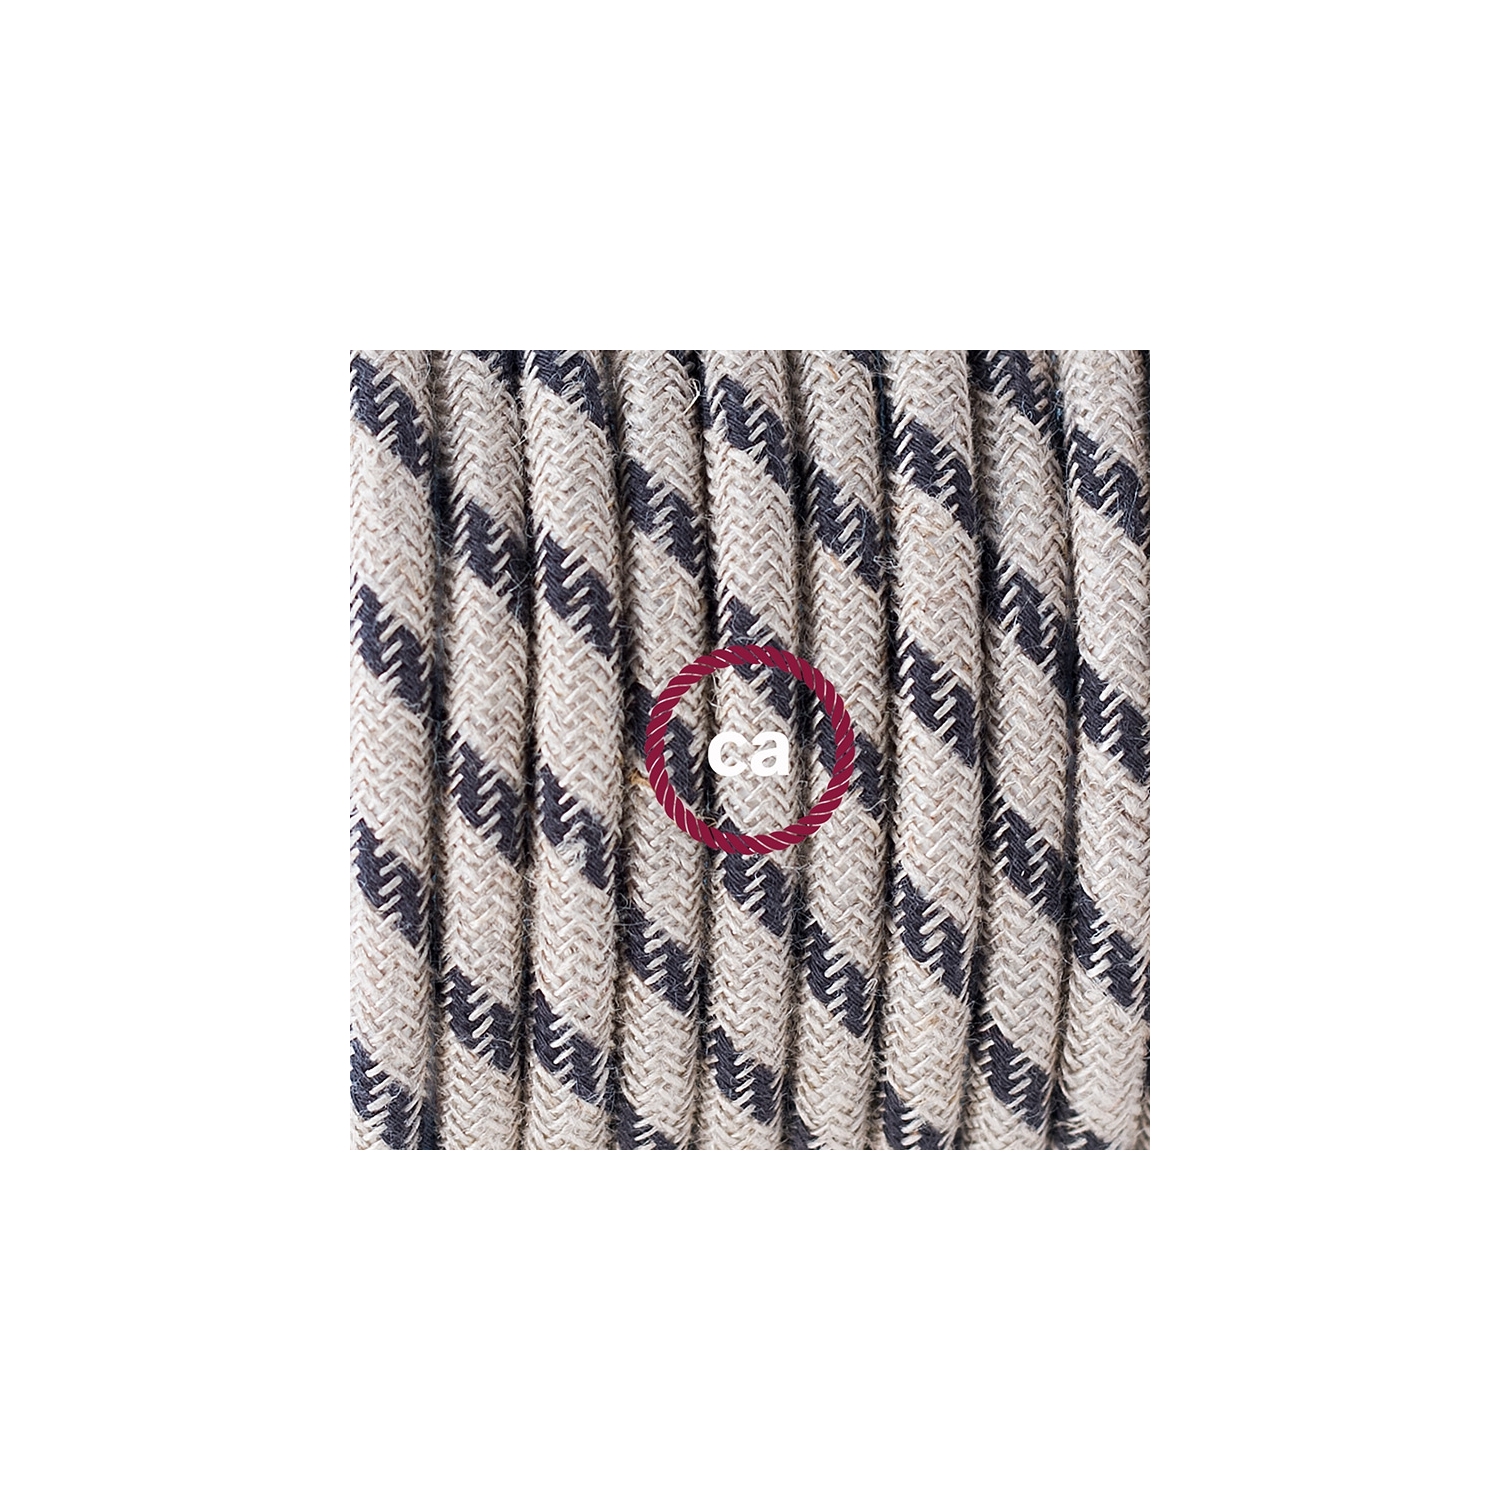 Plug-in Pendant with switch on socket | RD54 Natural & Charcoal Linen Stripe